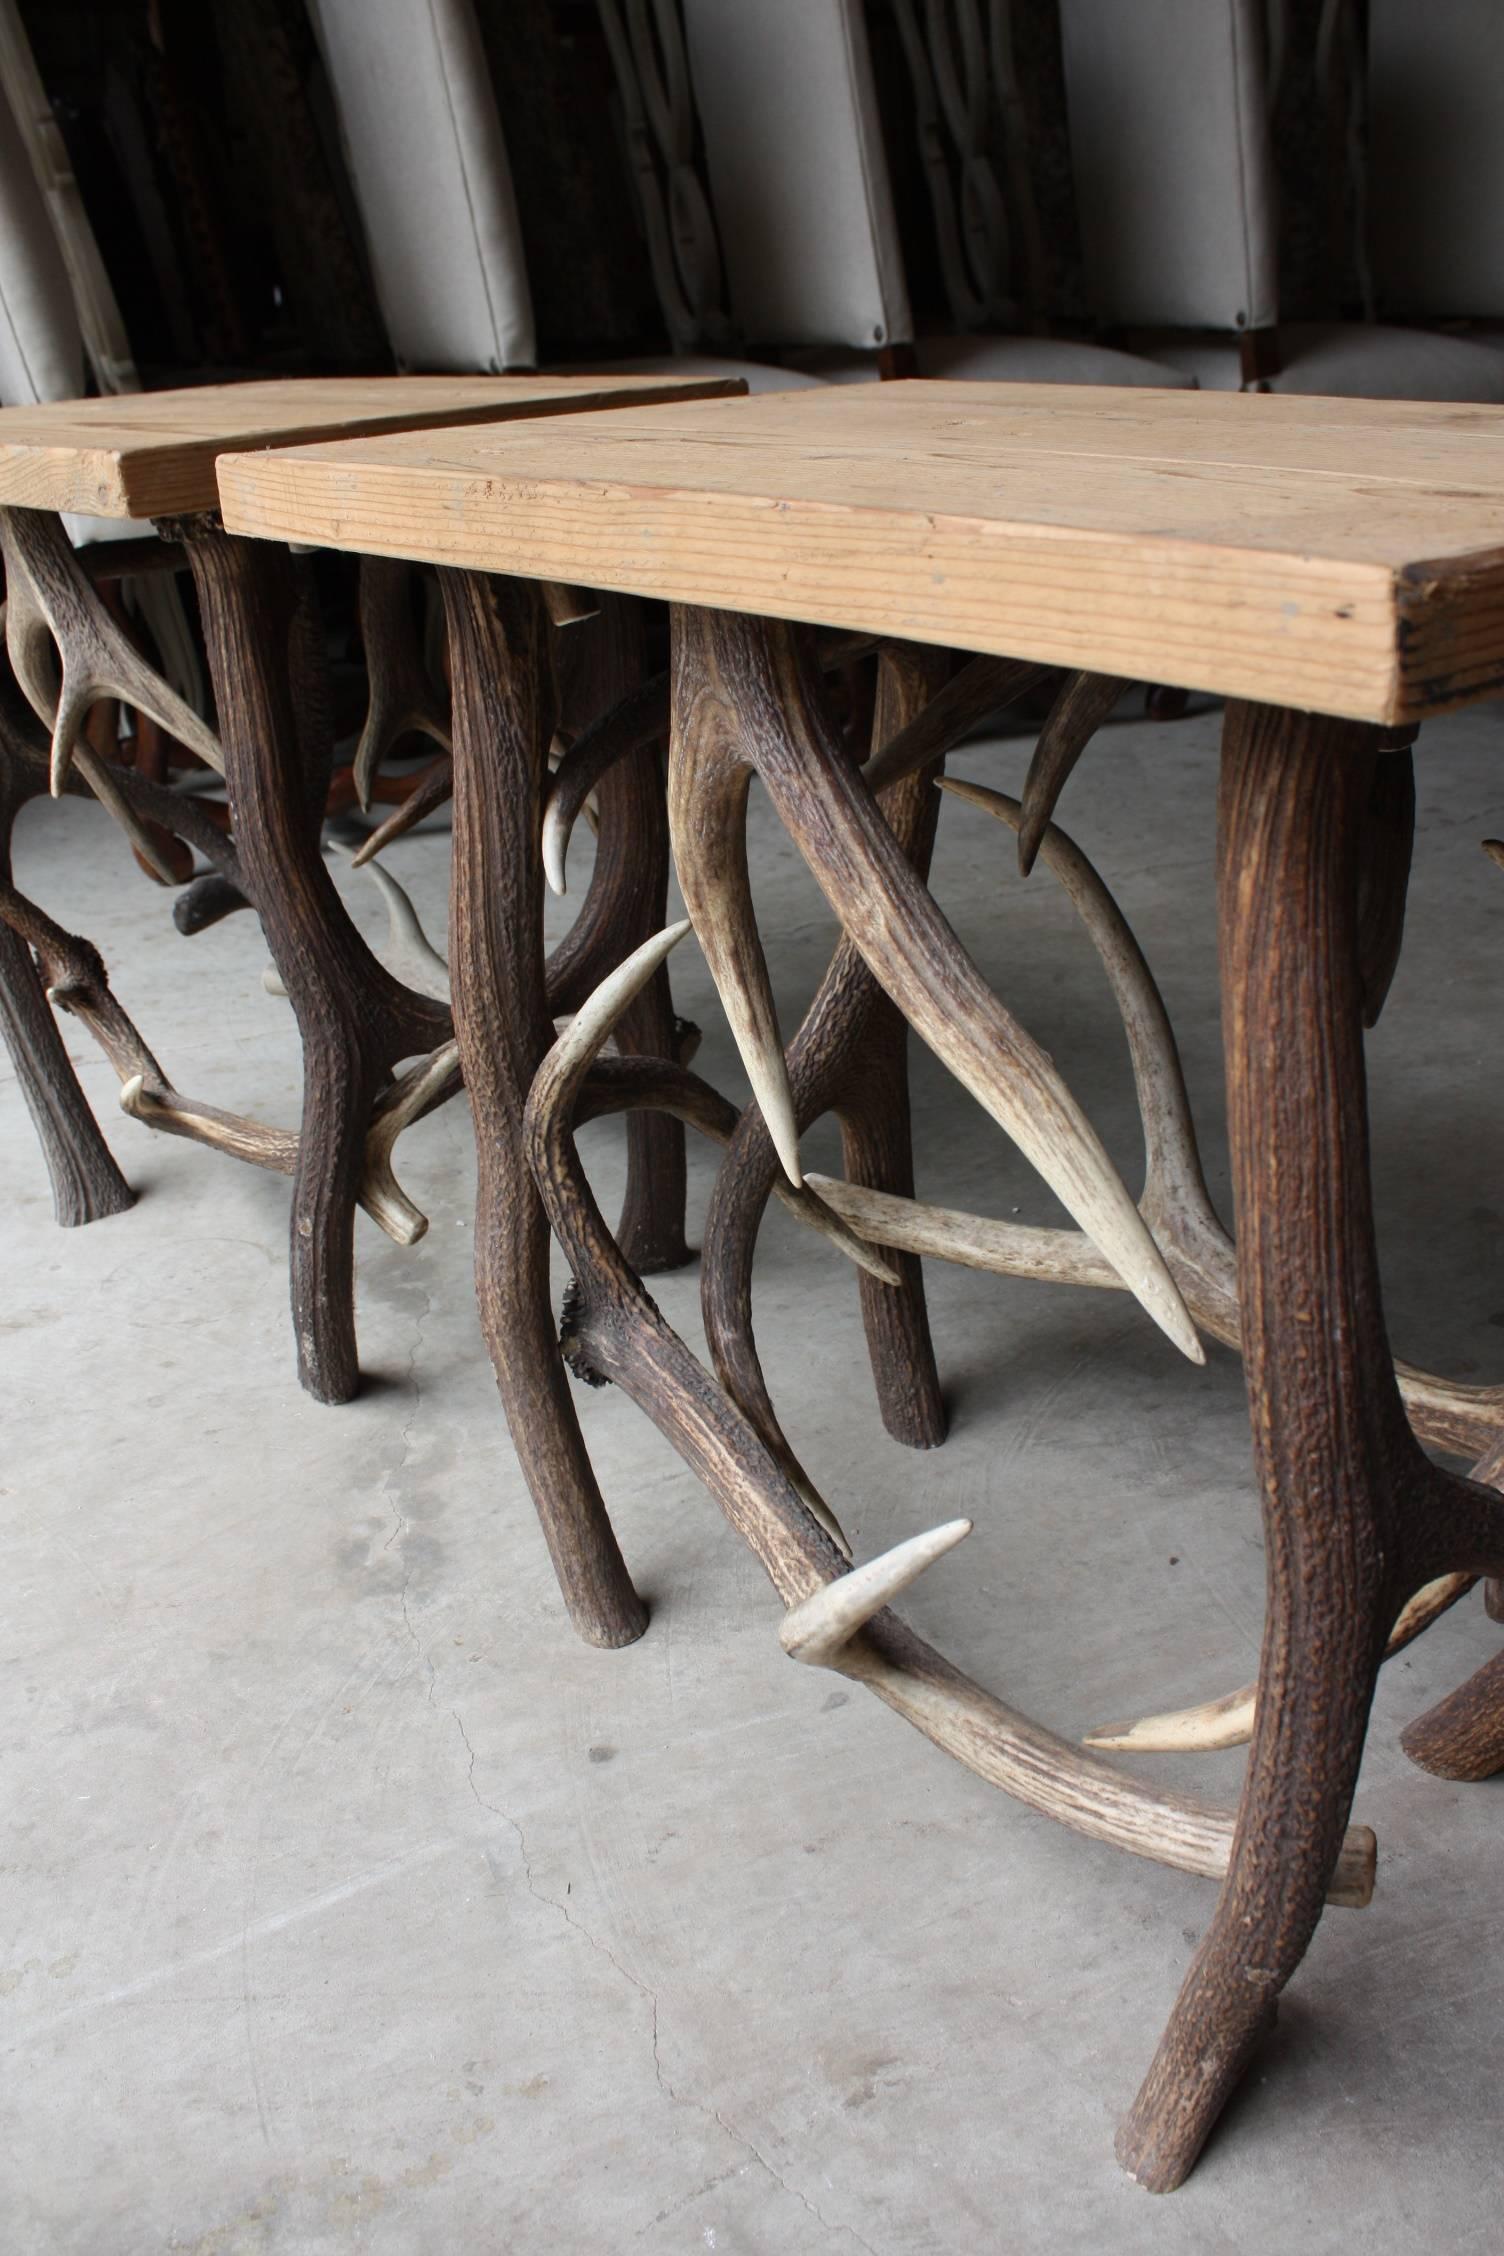 These occasional tables would be great in any cabin or country home. Can be bought as a pair or separately.